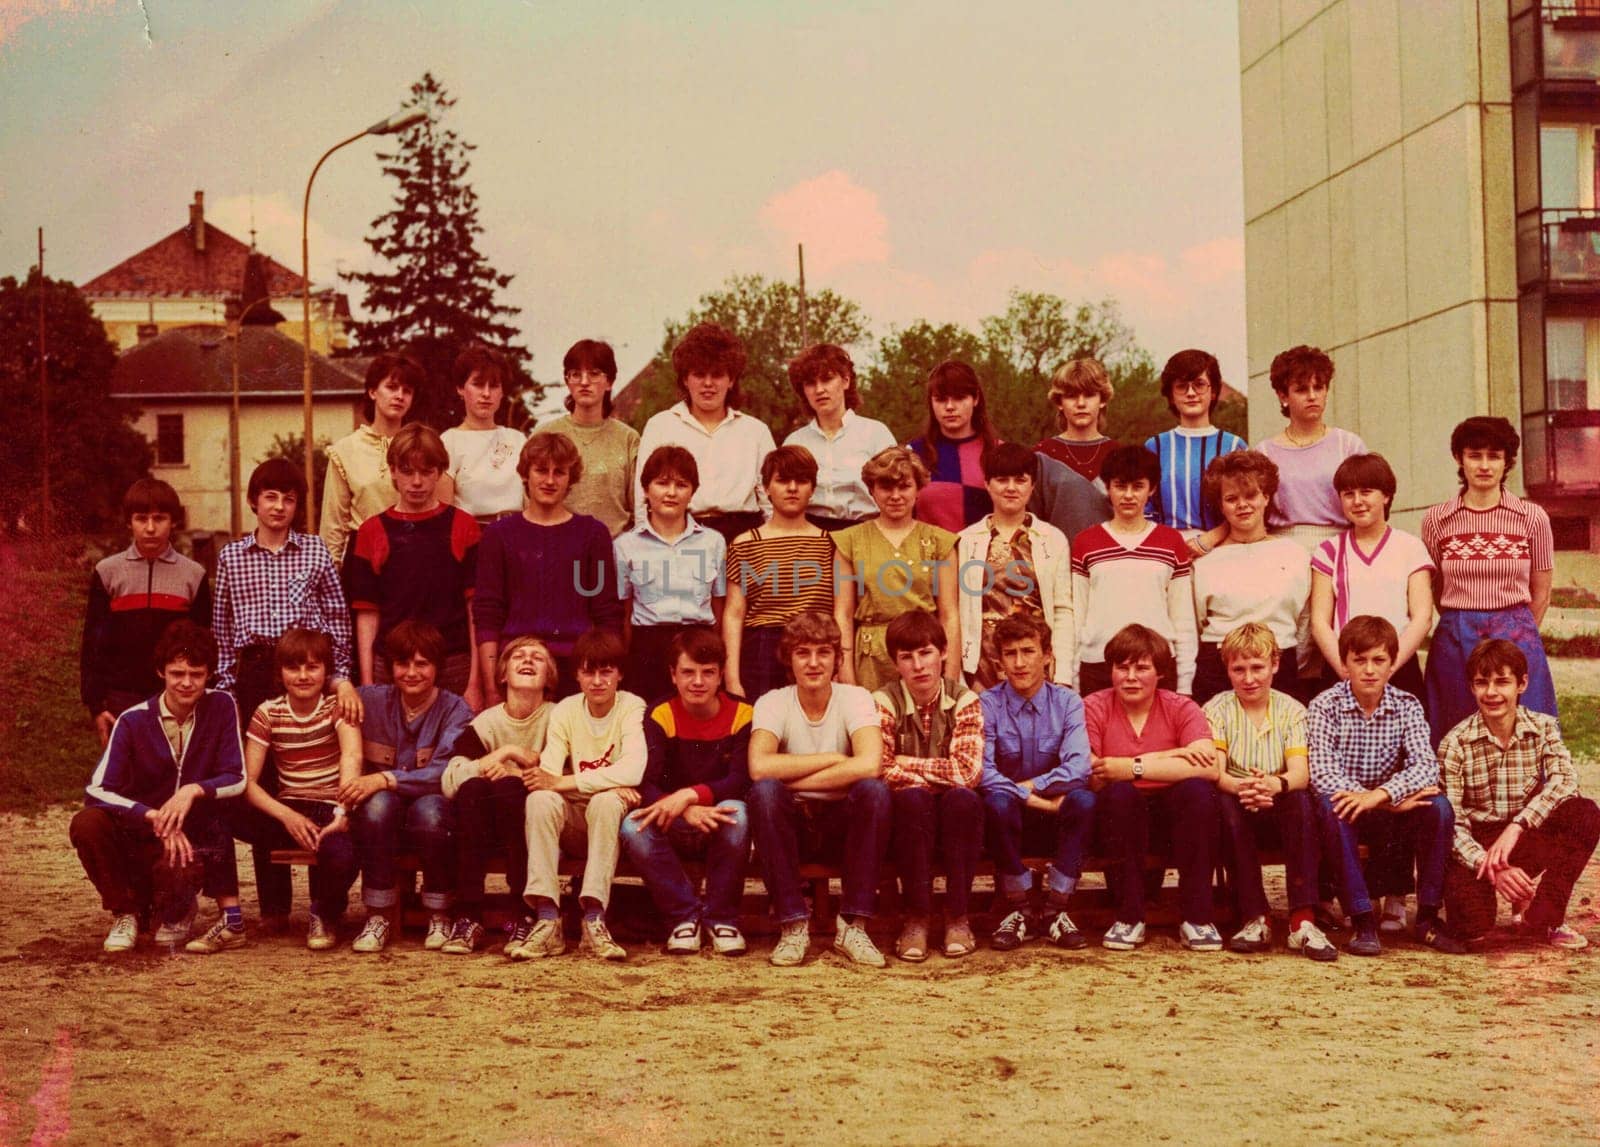 THE CZECHOSLOVAK SOCIALIST REPUBLIC - CIRCA 1980s: Retro photo of group of school pupils (teenagers) with their female teacher. Color photo